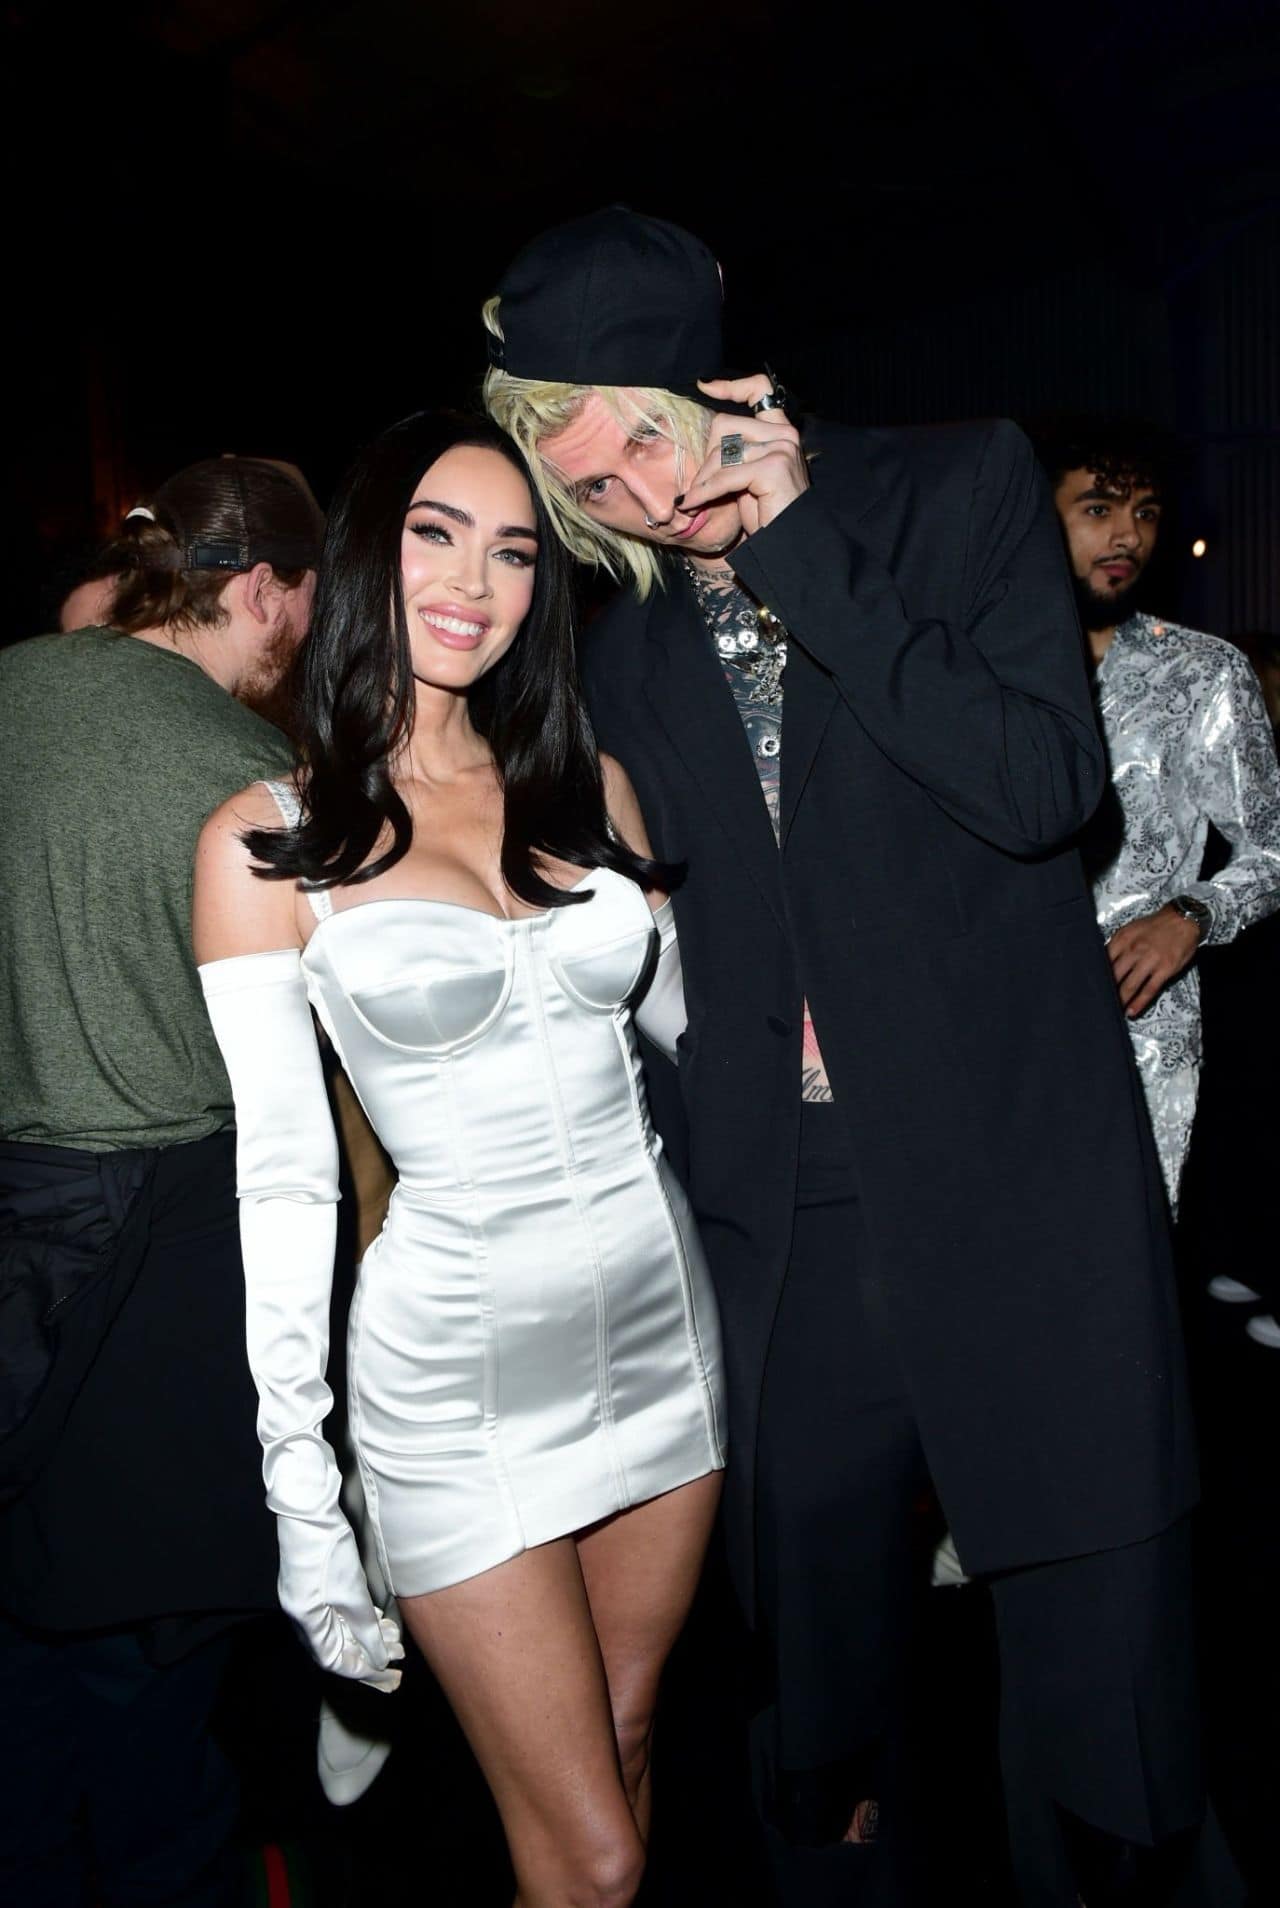 Megan Fox Changed Into a White Mini Dress for Universal's Grammy Afterparty